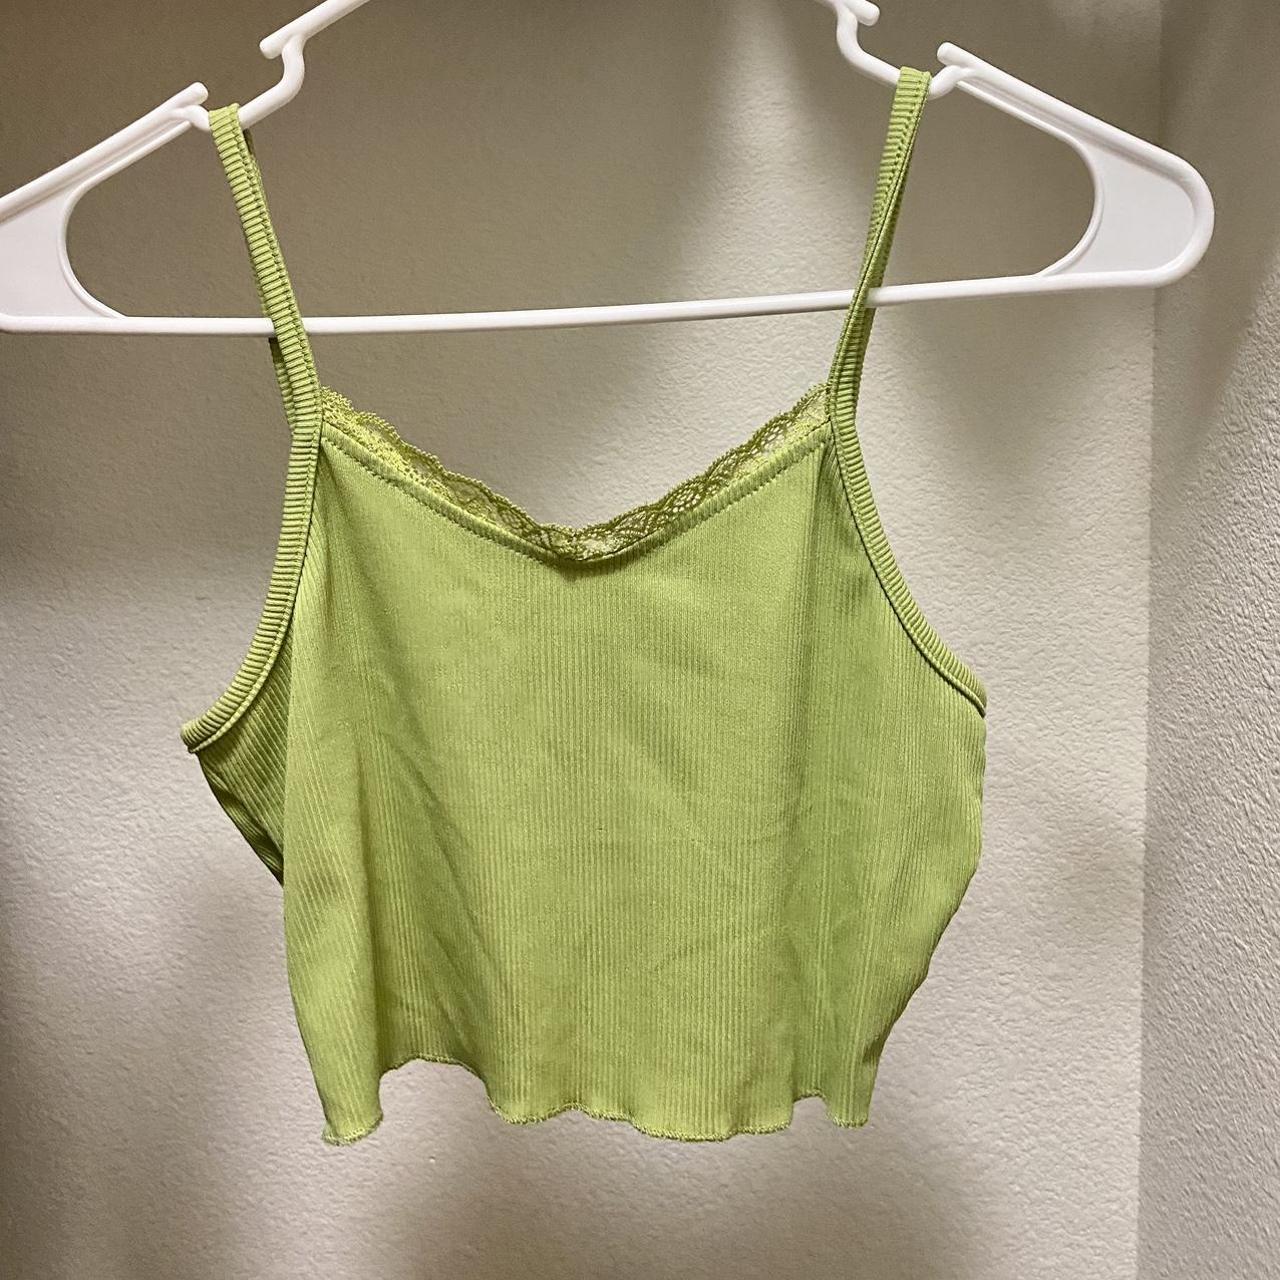 xs/s green cute top it’s stretchy:) 7$ - Depop